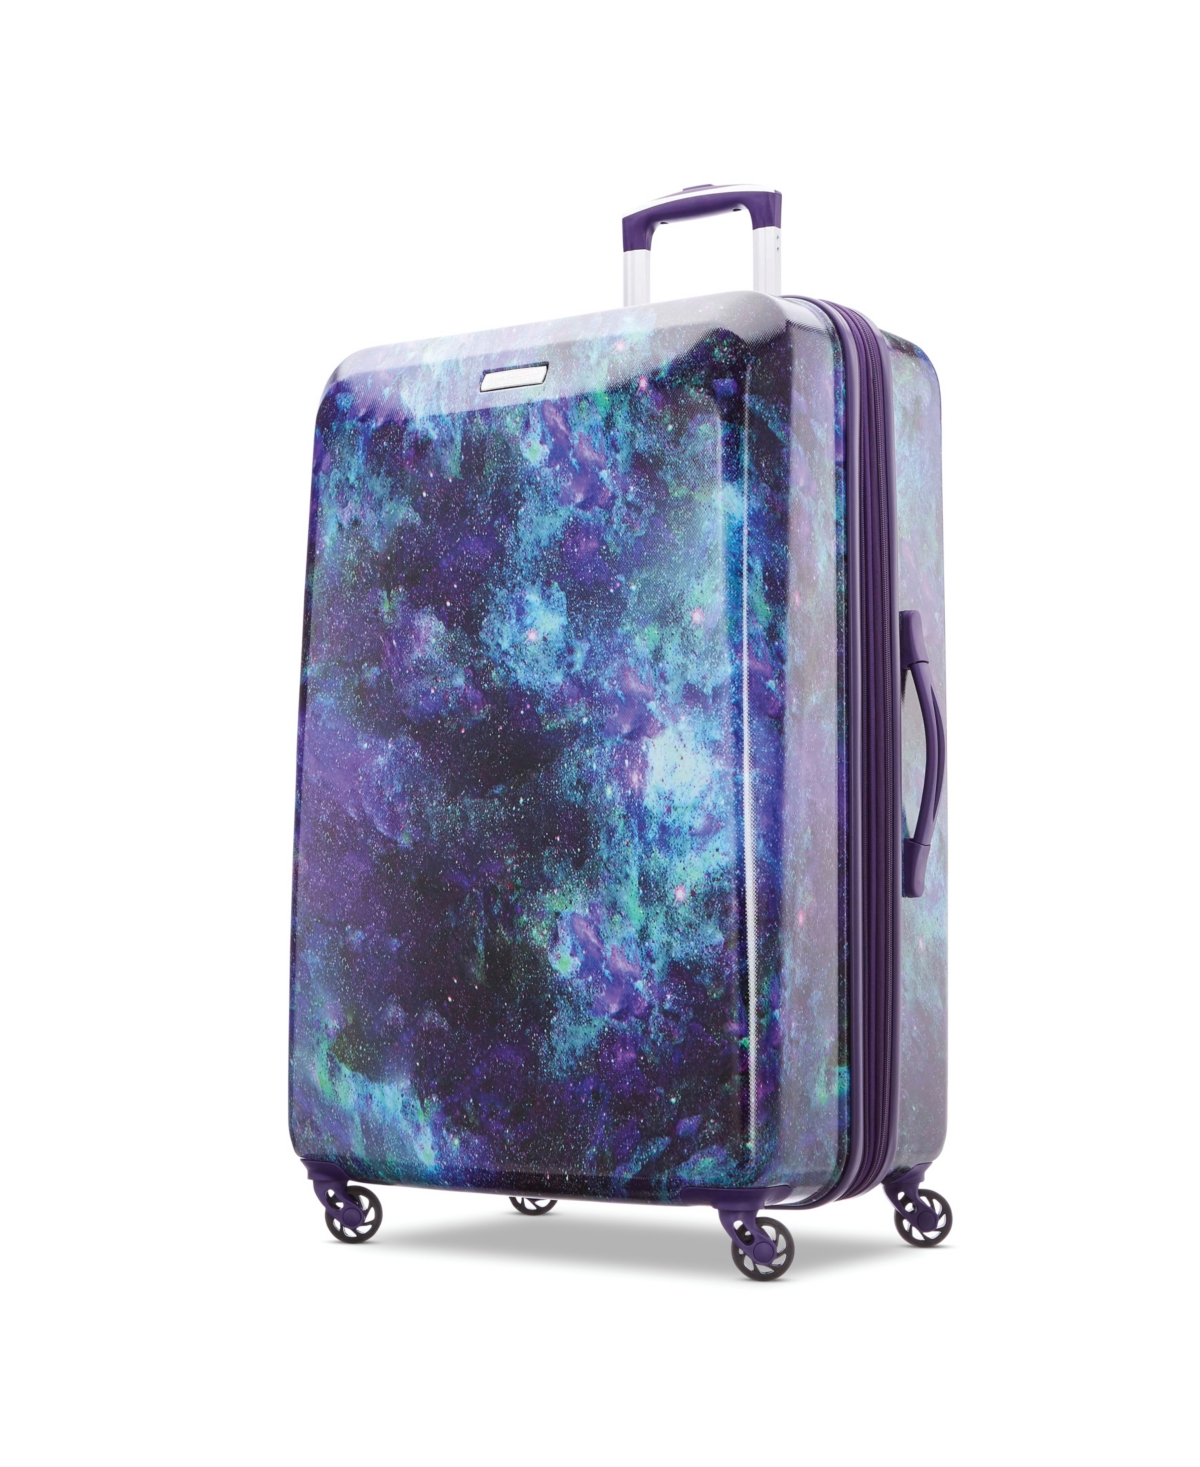 Moonlight 28" Expandable Hardside Spinner Suitcase - Cosmos